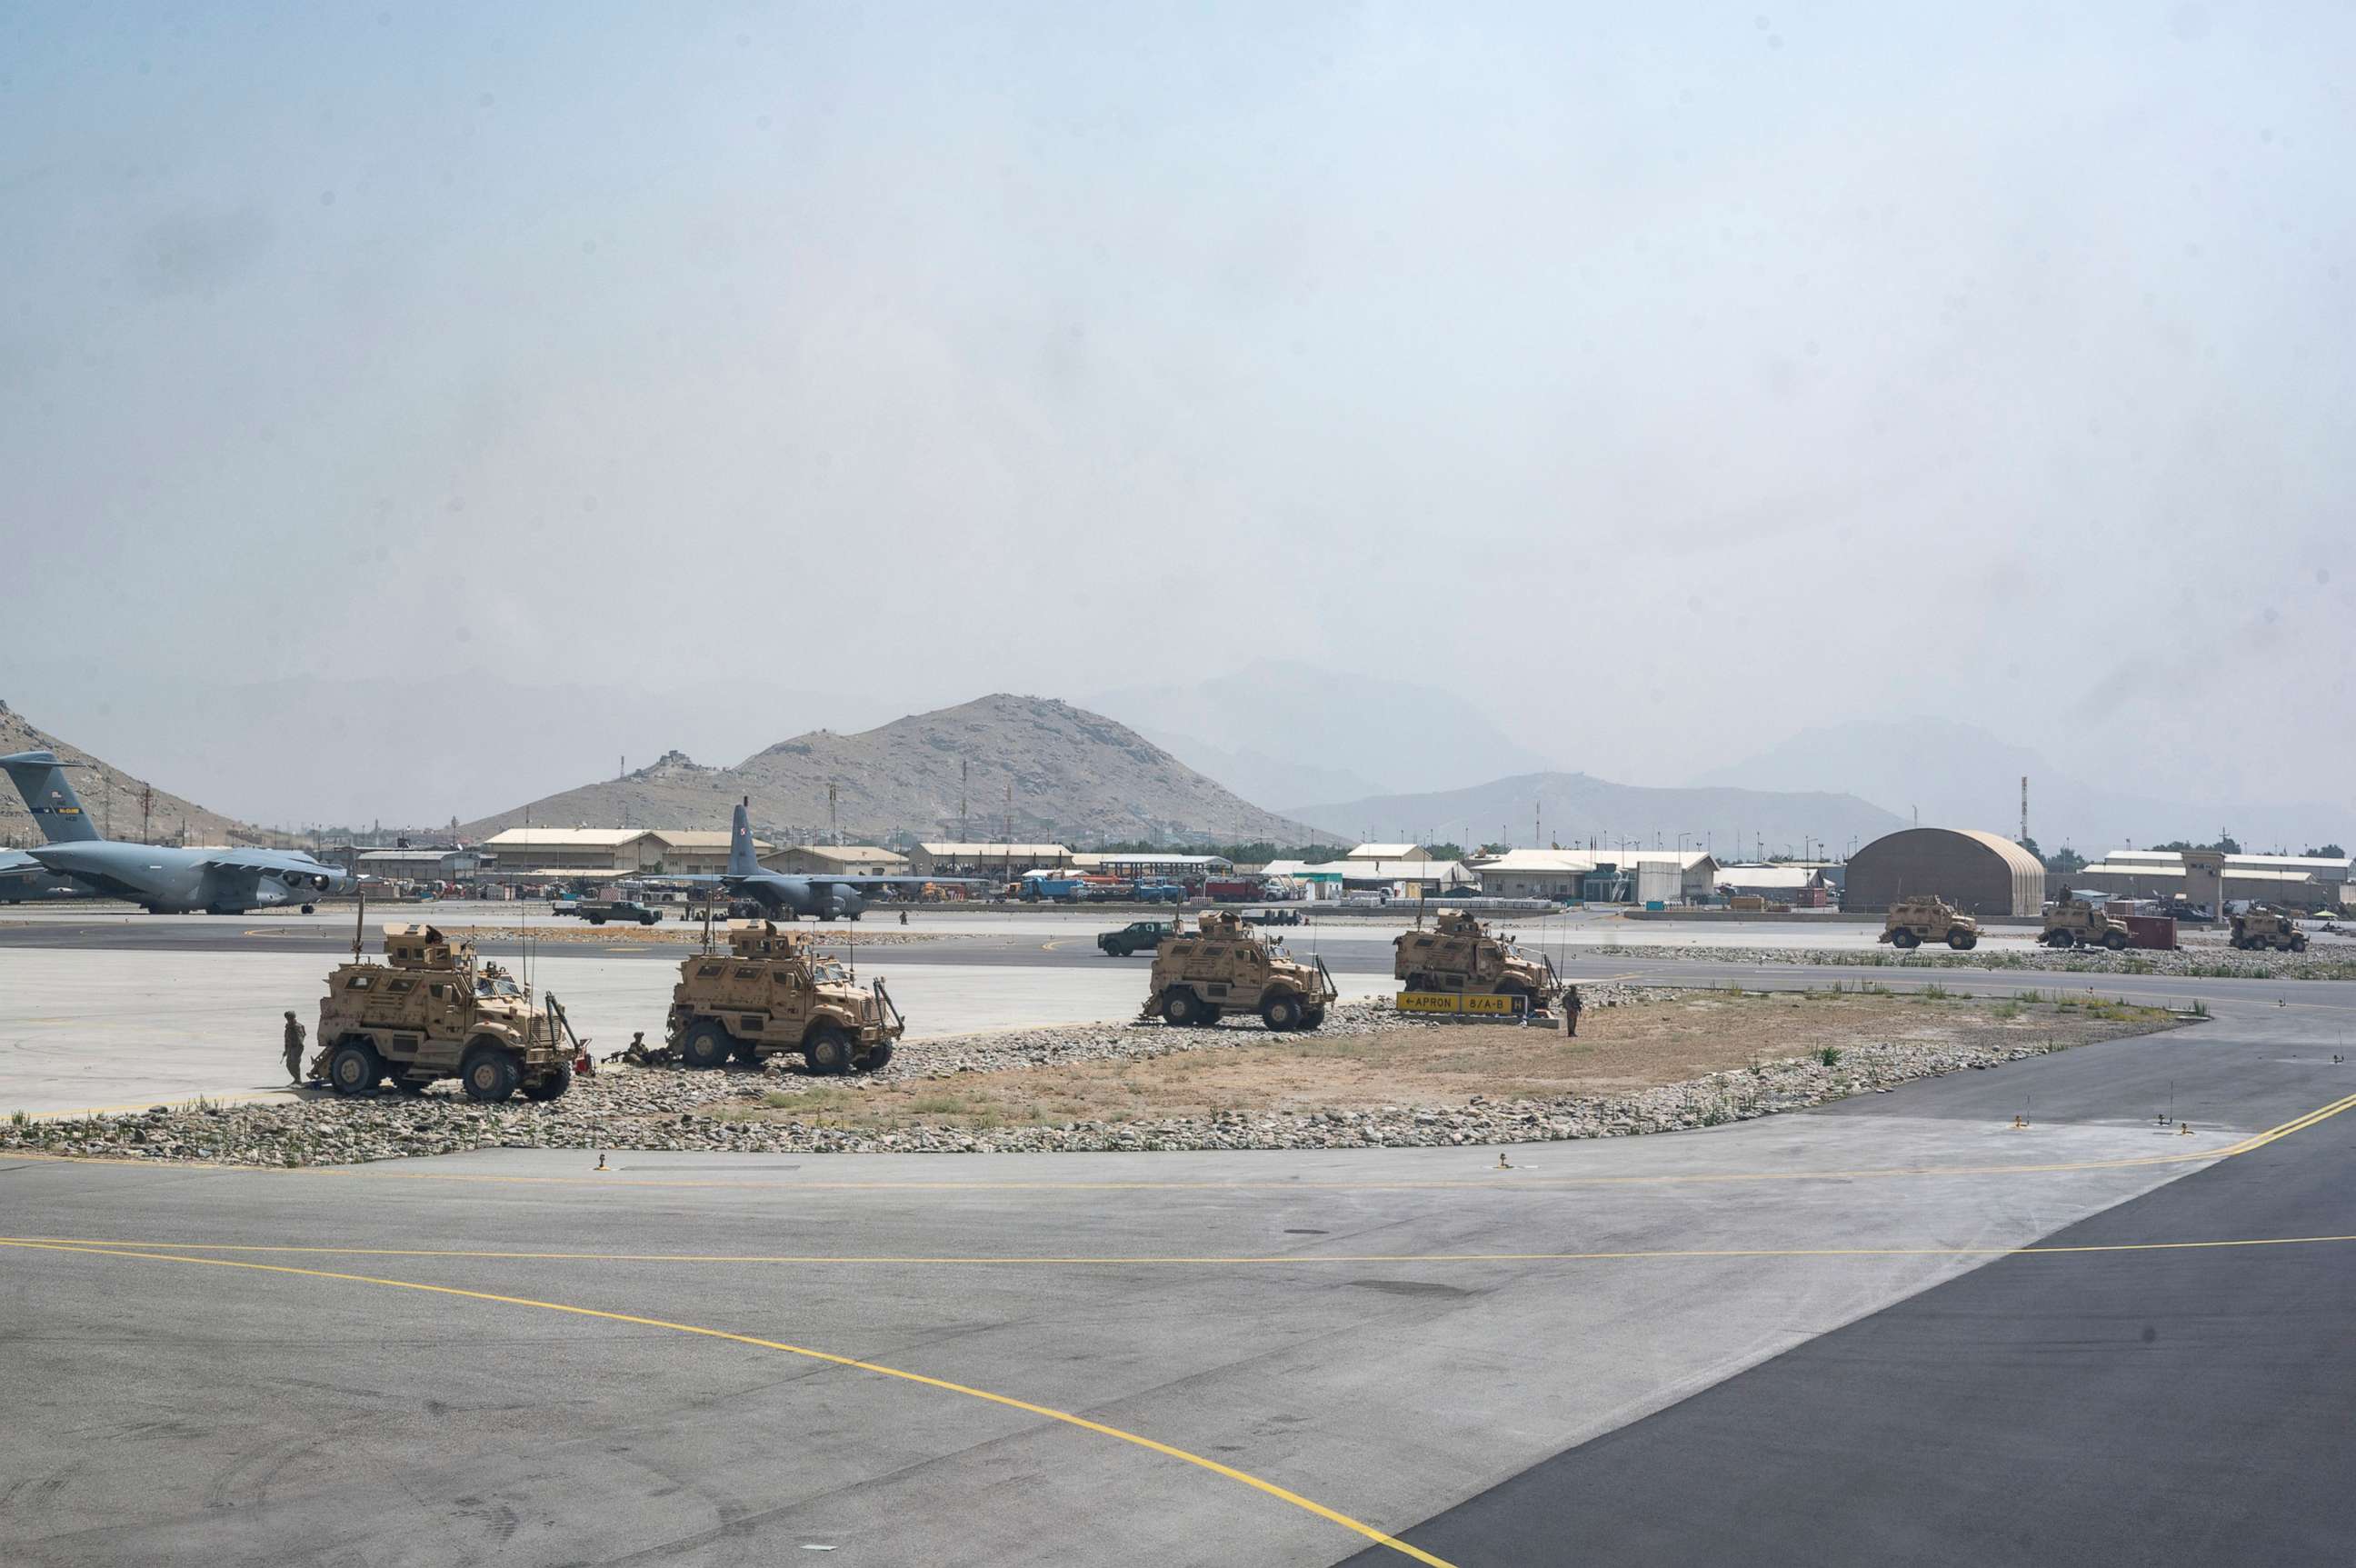 PHOTO: U.S. Army soldiers with the 82nd Airborne Division, patrol Hamid Karzai International Airport in support of Operation Allies Refuge, Aug.17, 2021, in Kabul, Afghanistan.